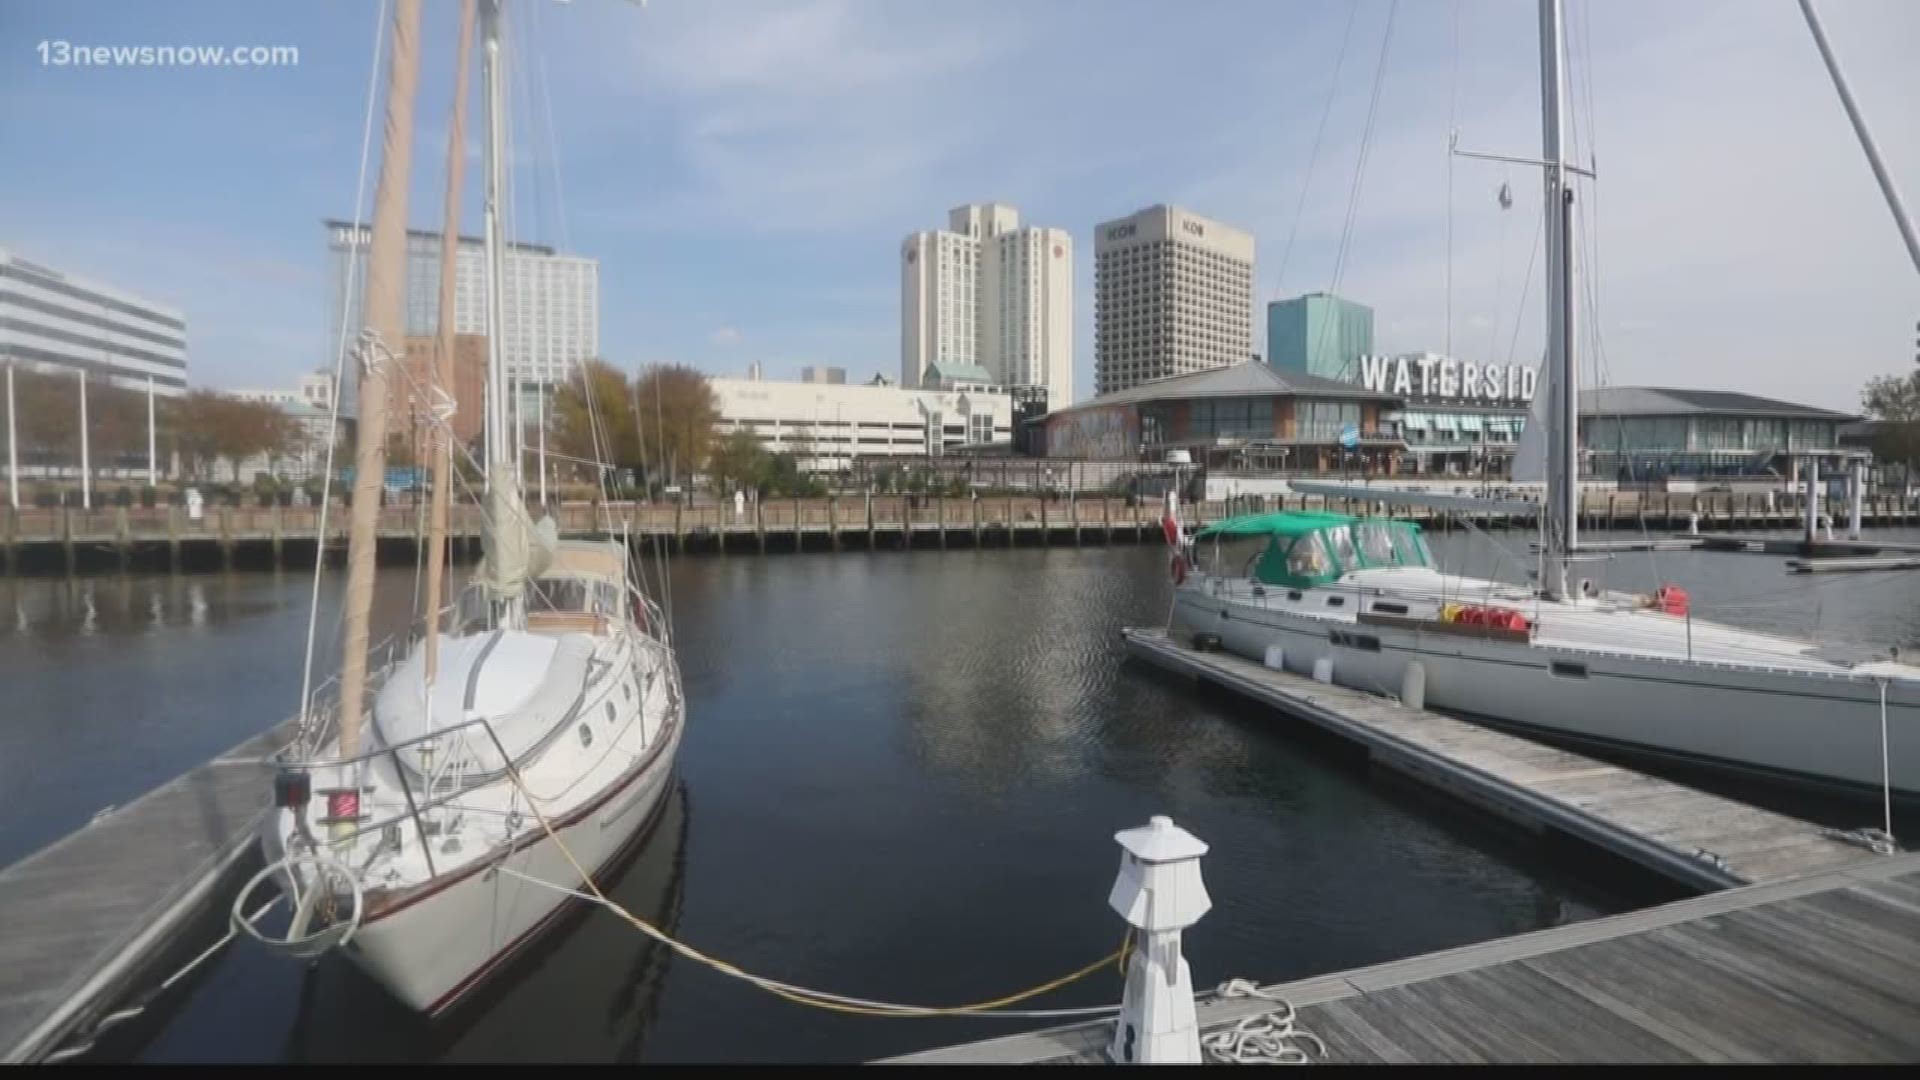 City leaders say they want this to be a world-class marina.